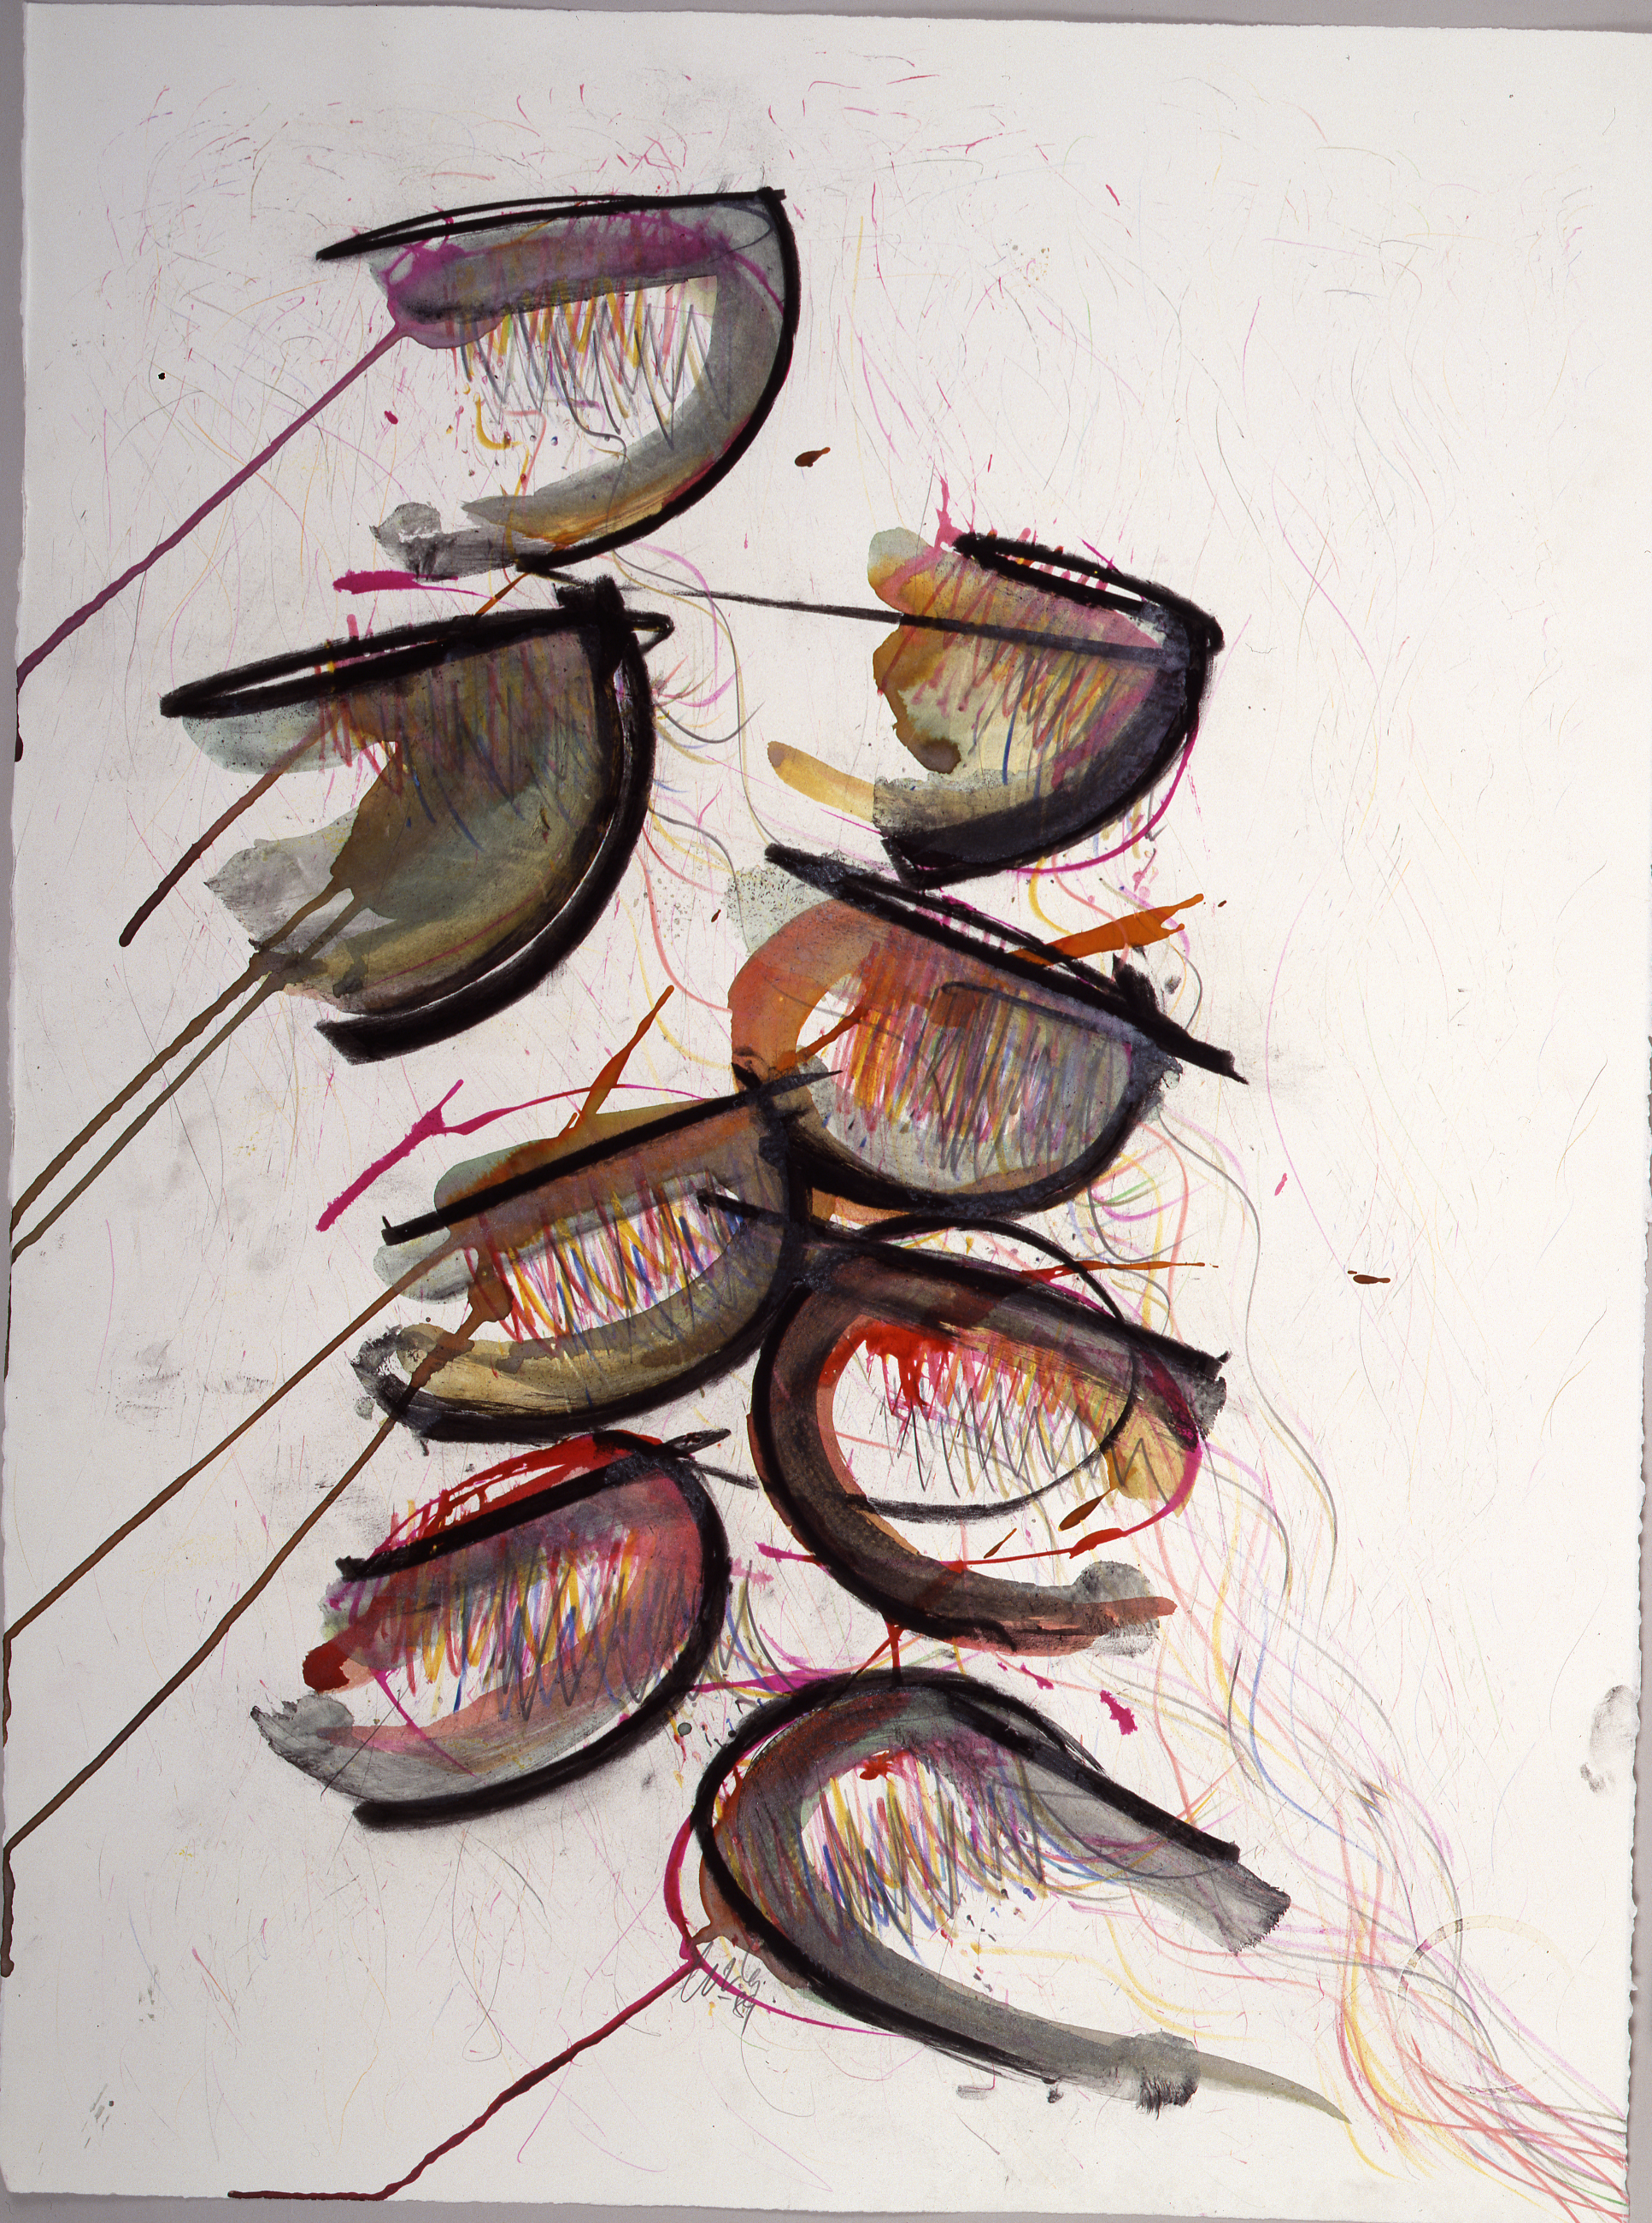  Dale Chihuly,&nbsp; Macchia Drawing #19,&nbsp; (1982, mixed media on paper, 30 x 22 inches), DC.87 